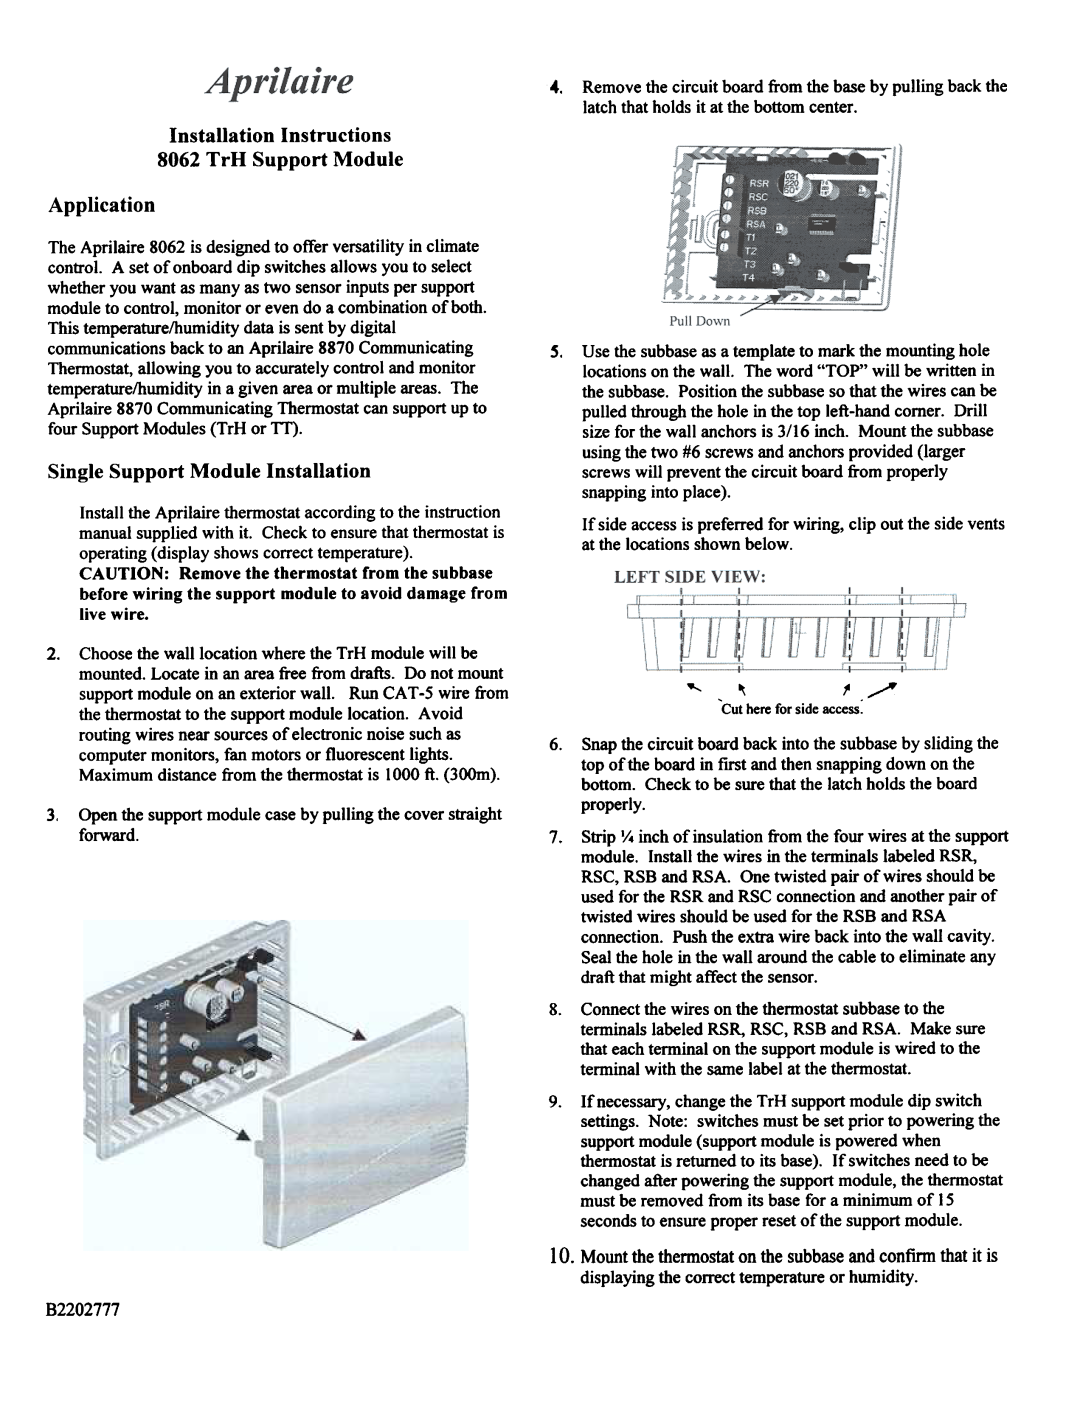 Aprilaire installation instructions Installation Instructions 8062TrH Support Module, Application, B2202777 